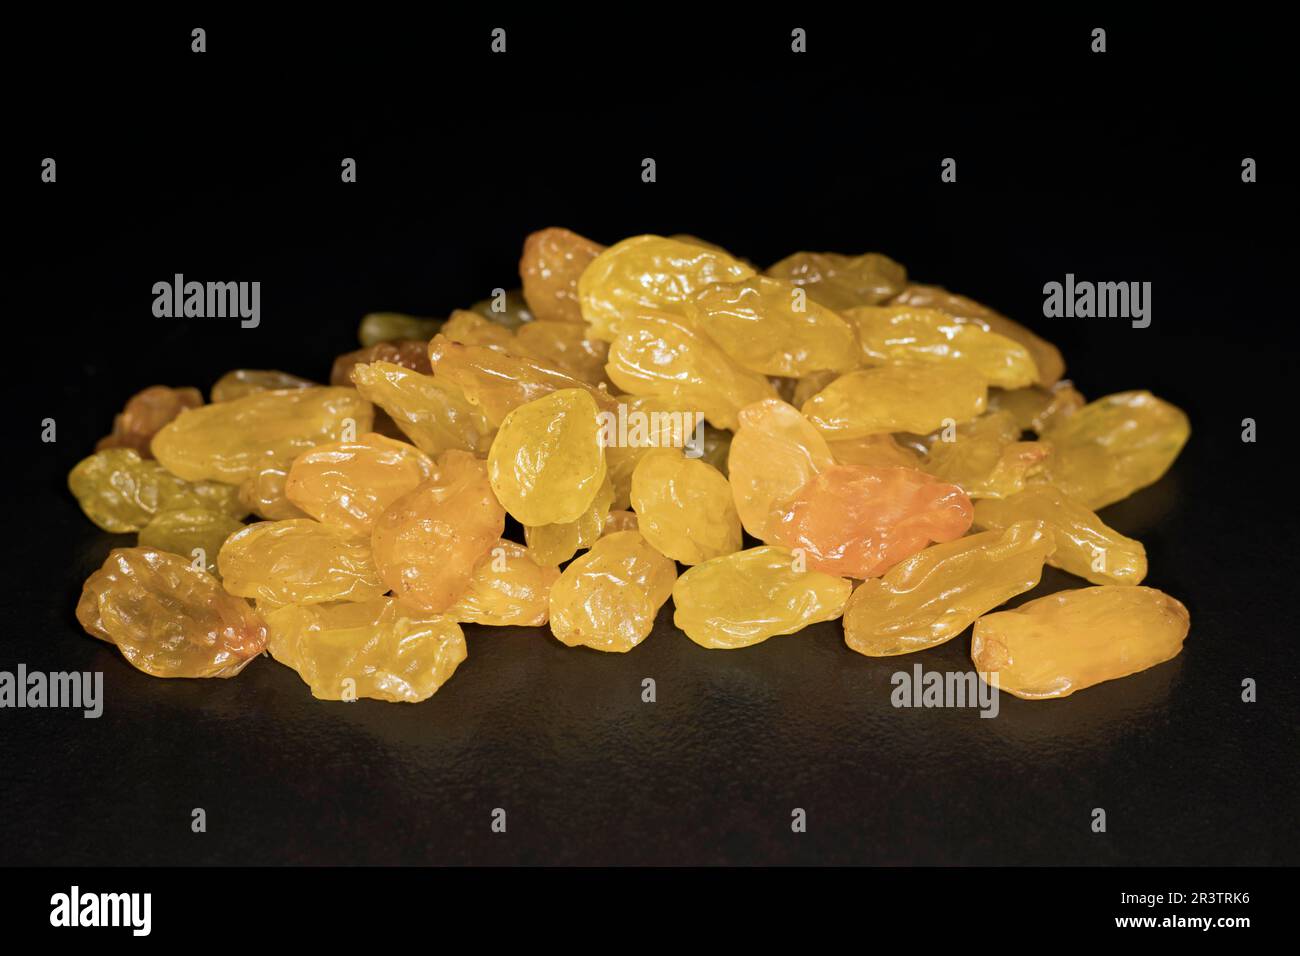 Sultanas, food photography with black background Stock Photo